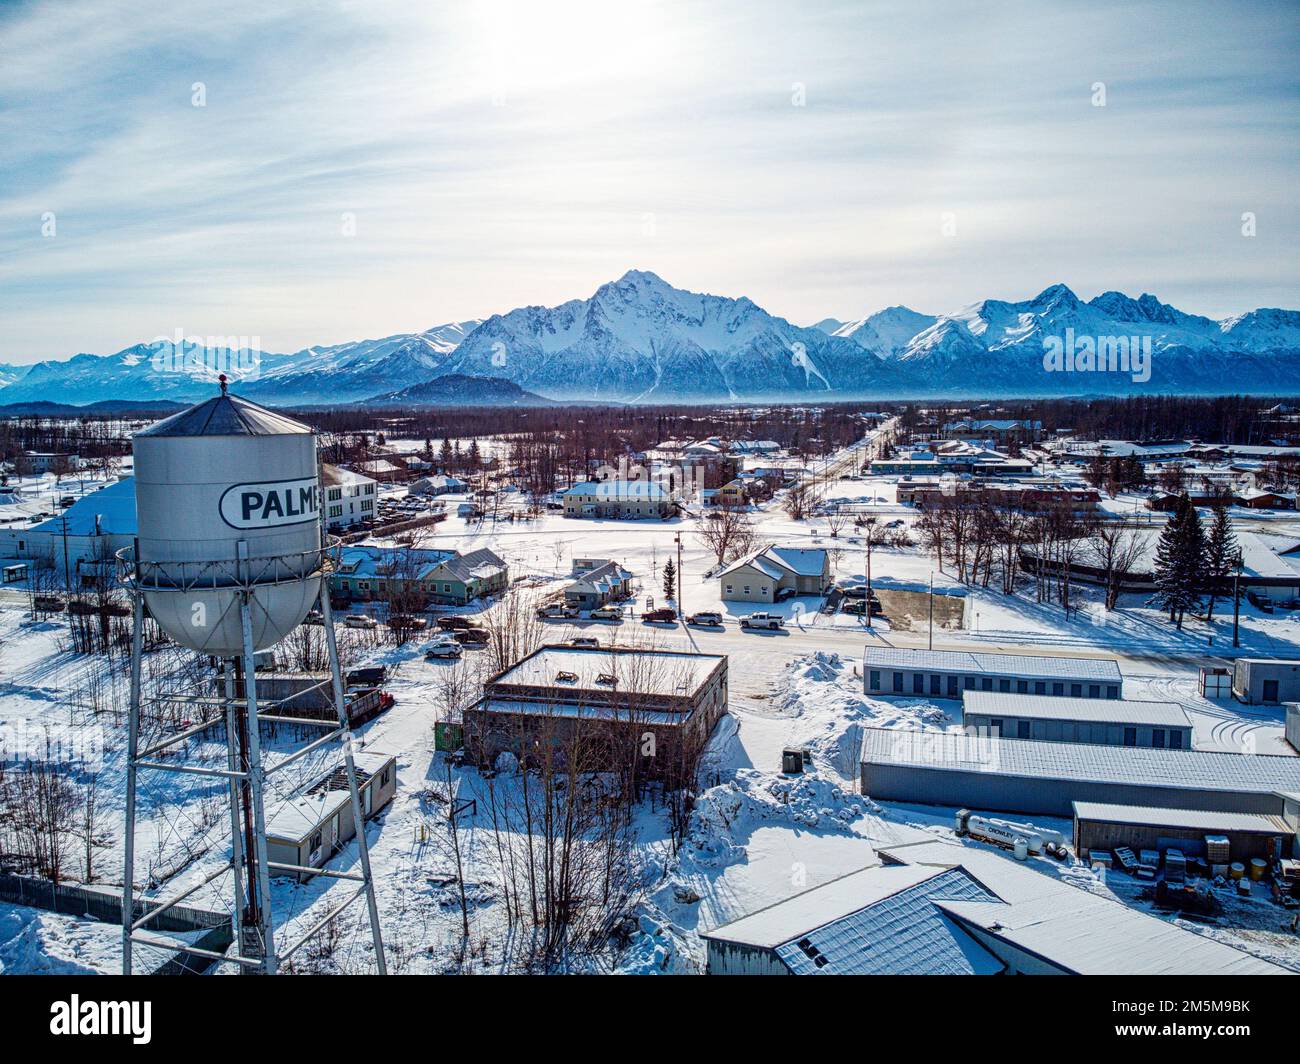 An aerial winter view of the city of Palmer with some industrial buildings and mountains Stock Photo